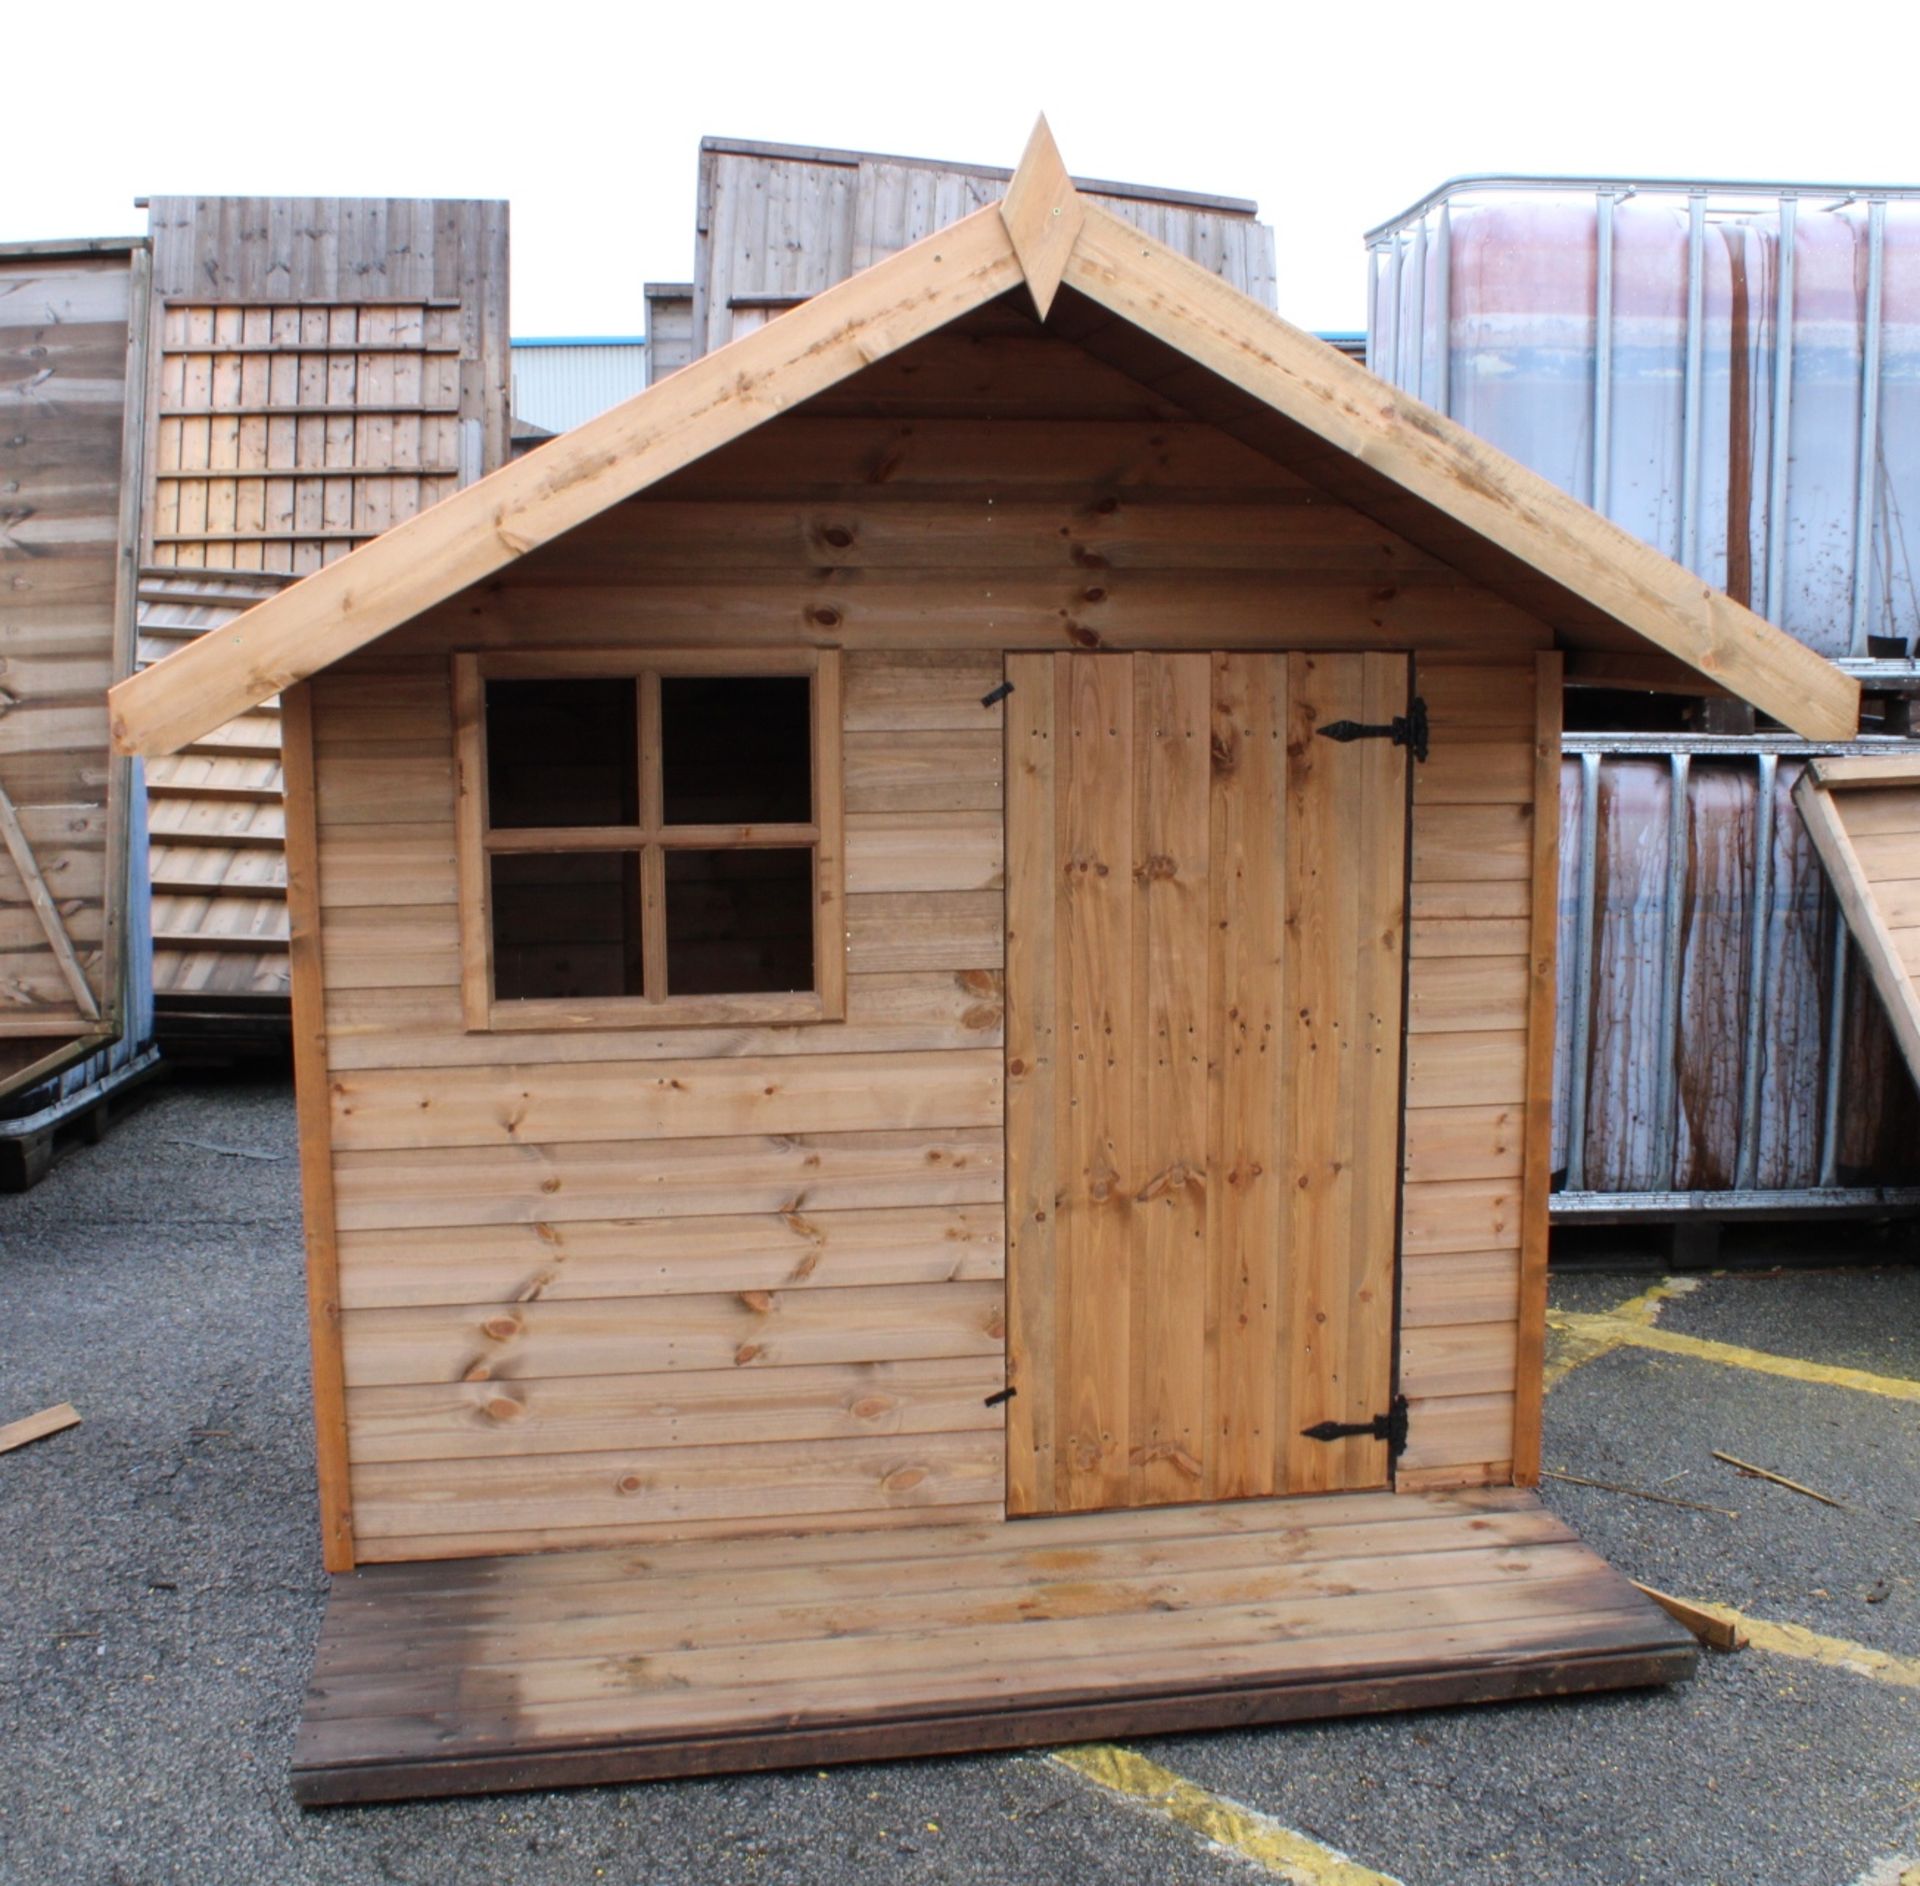 4x6 kids playhouse with overhang and veranda, Stnadrad 16mm Nominal Cladding - Image 2 of 4